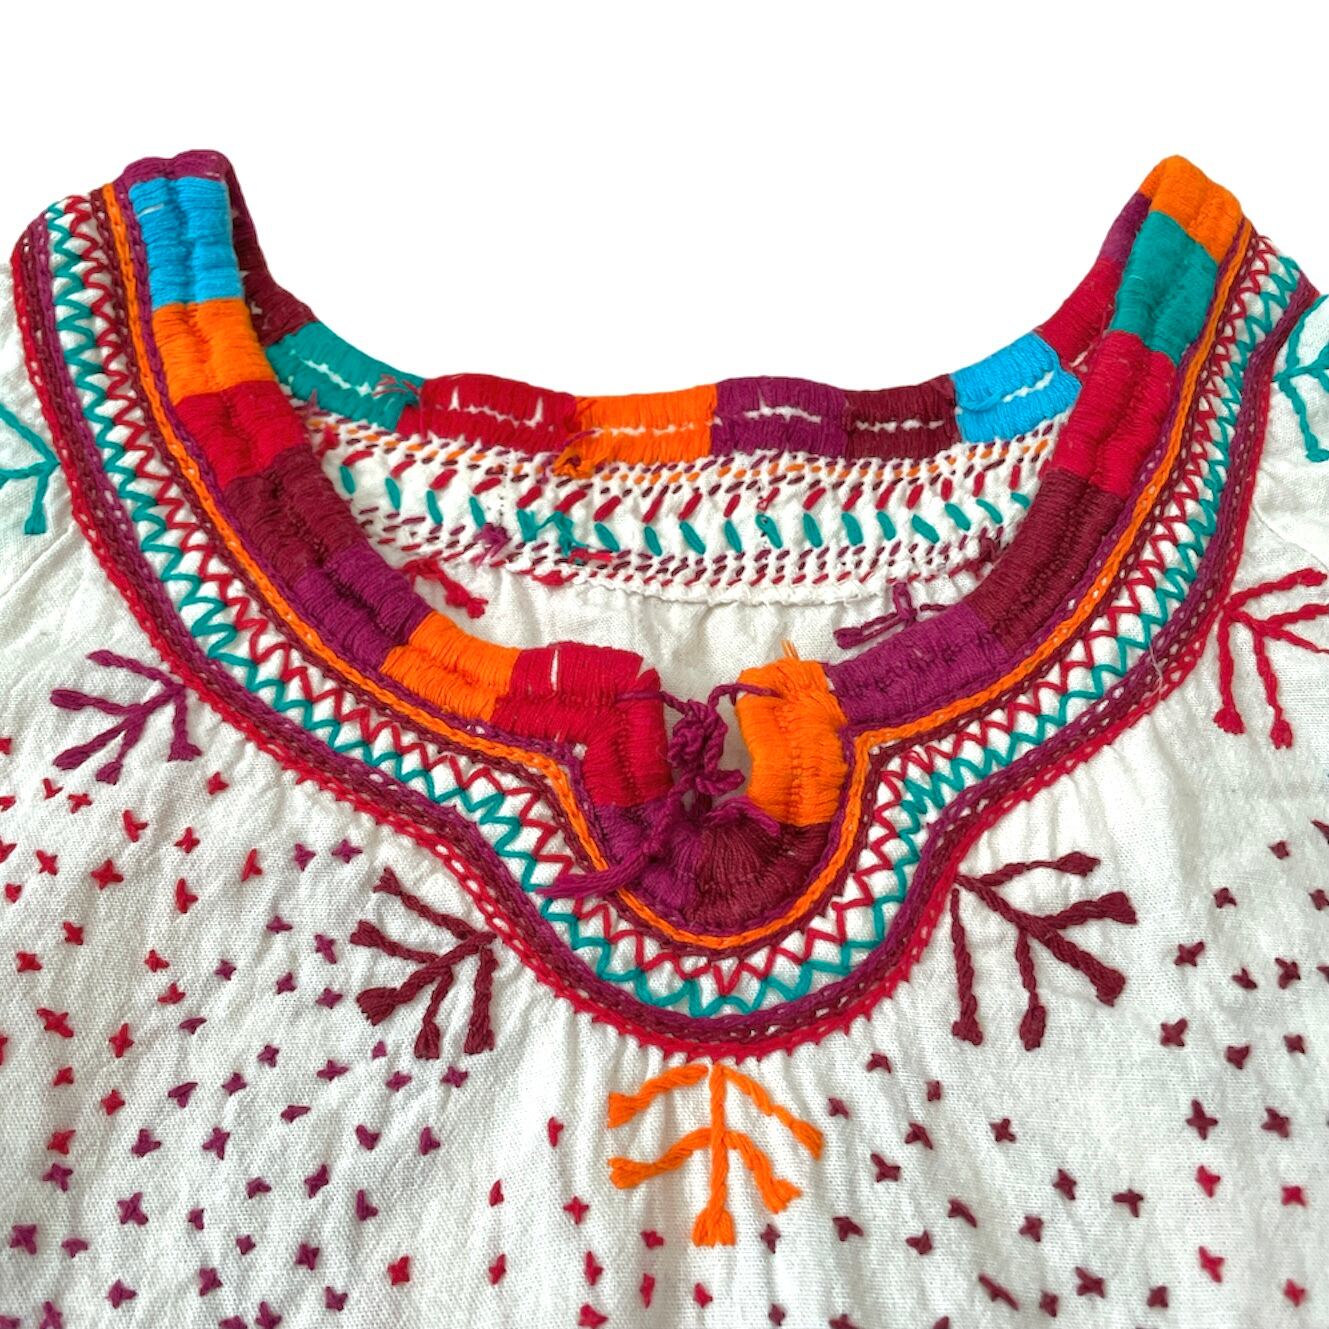 Milpa Embroidely Blouse／メキシコ刺繍  ブラウス